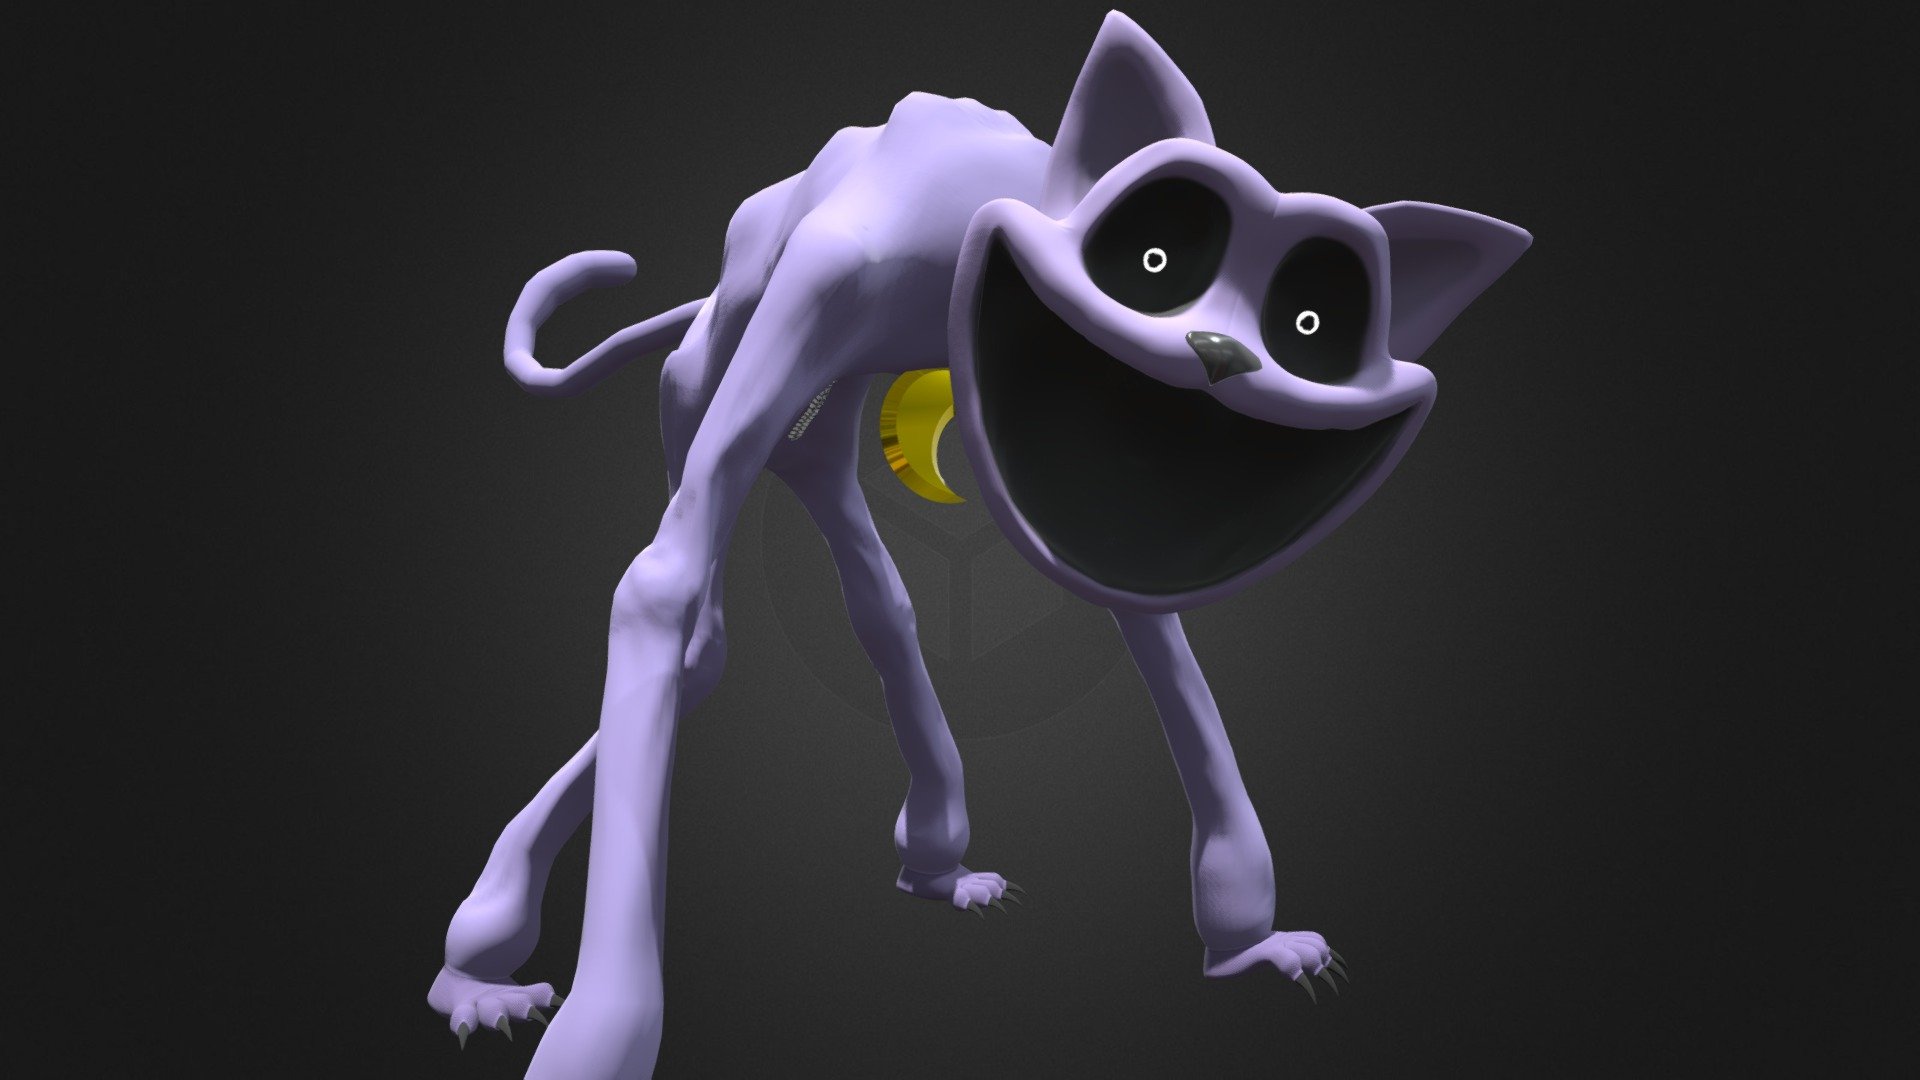 This is my final model of CatNap before Poppy Playtime Chapter 3 releases. I originally built this in Blender 4.0.1 with fur, but Sketchfab is not compatible with that version of Blender yet. So I uploaded as an FBX for now. 

I plan on posting a video of me creating this to my youtube channel soon. https://www.youtube.com/channel/UCtEqiCqHo8nxyDCikta-wNA

** If you use my model, please tag me or let me know. I would love to see what you do with it.** - CatNap  v16 Rigged - Download Free 3D model by Unschooling with Fin (@UnschoolingWithFin) 3d model